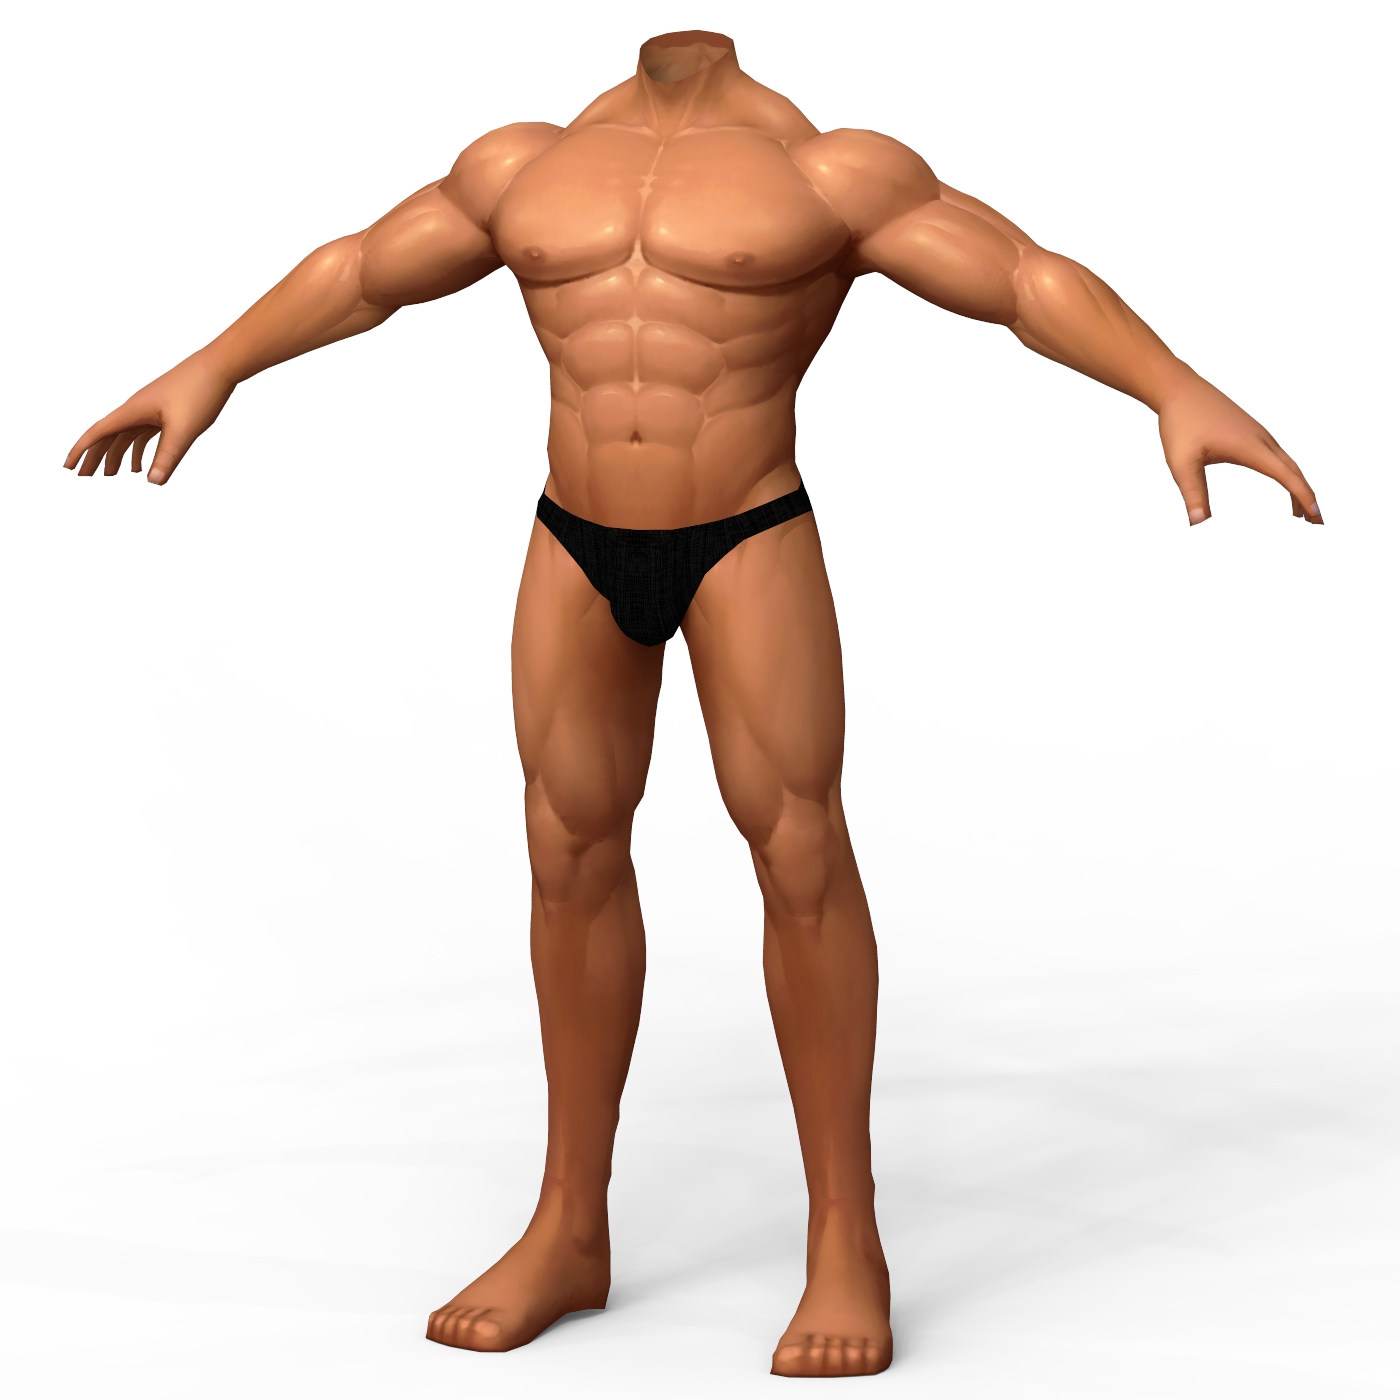 Low Poly Muscular Body Base Mesh by creativejungle007